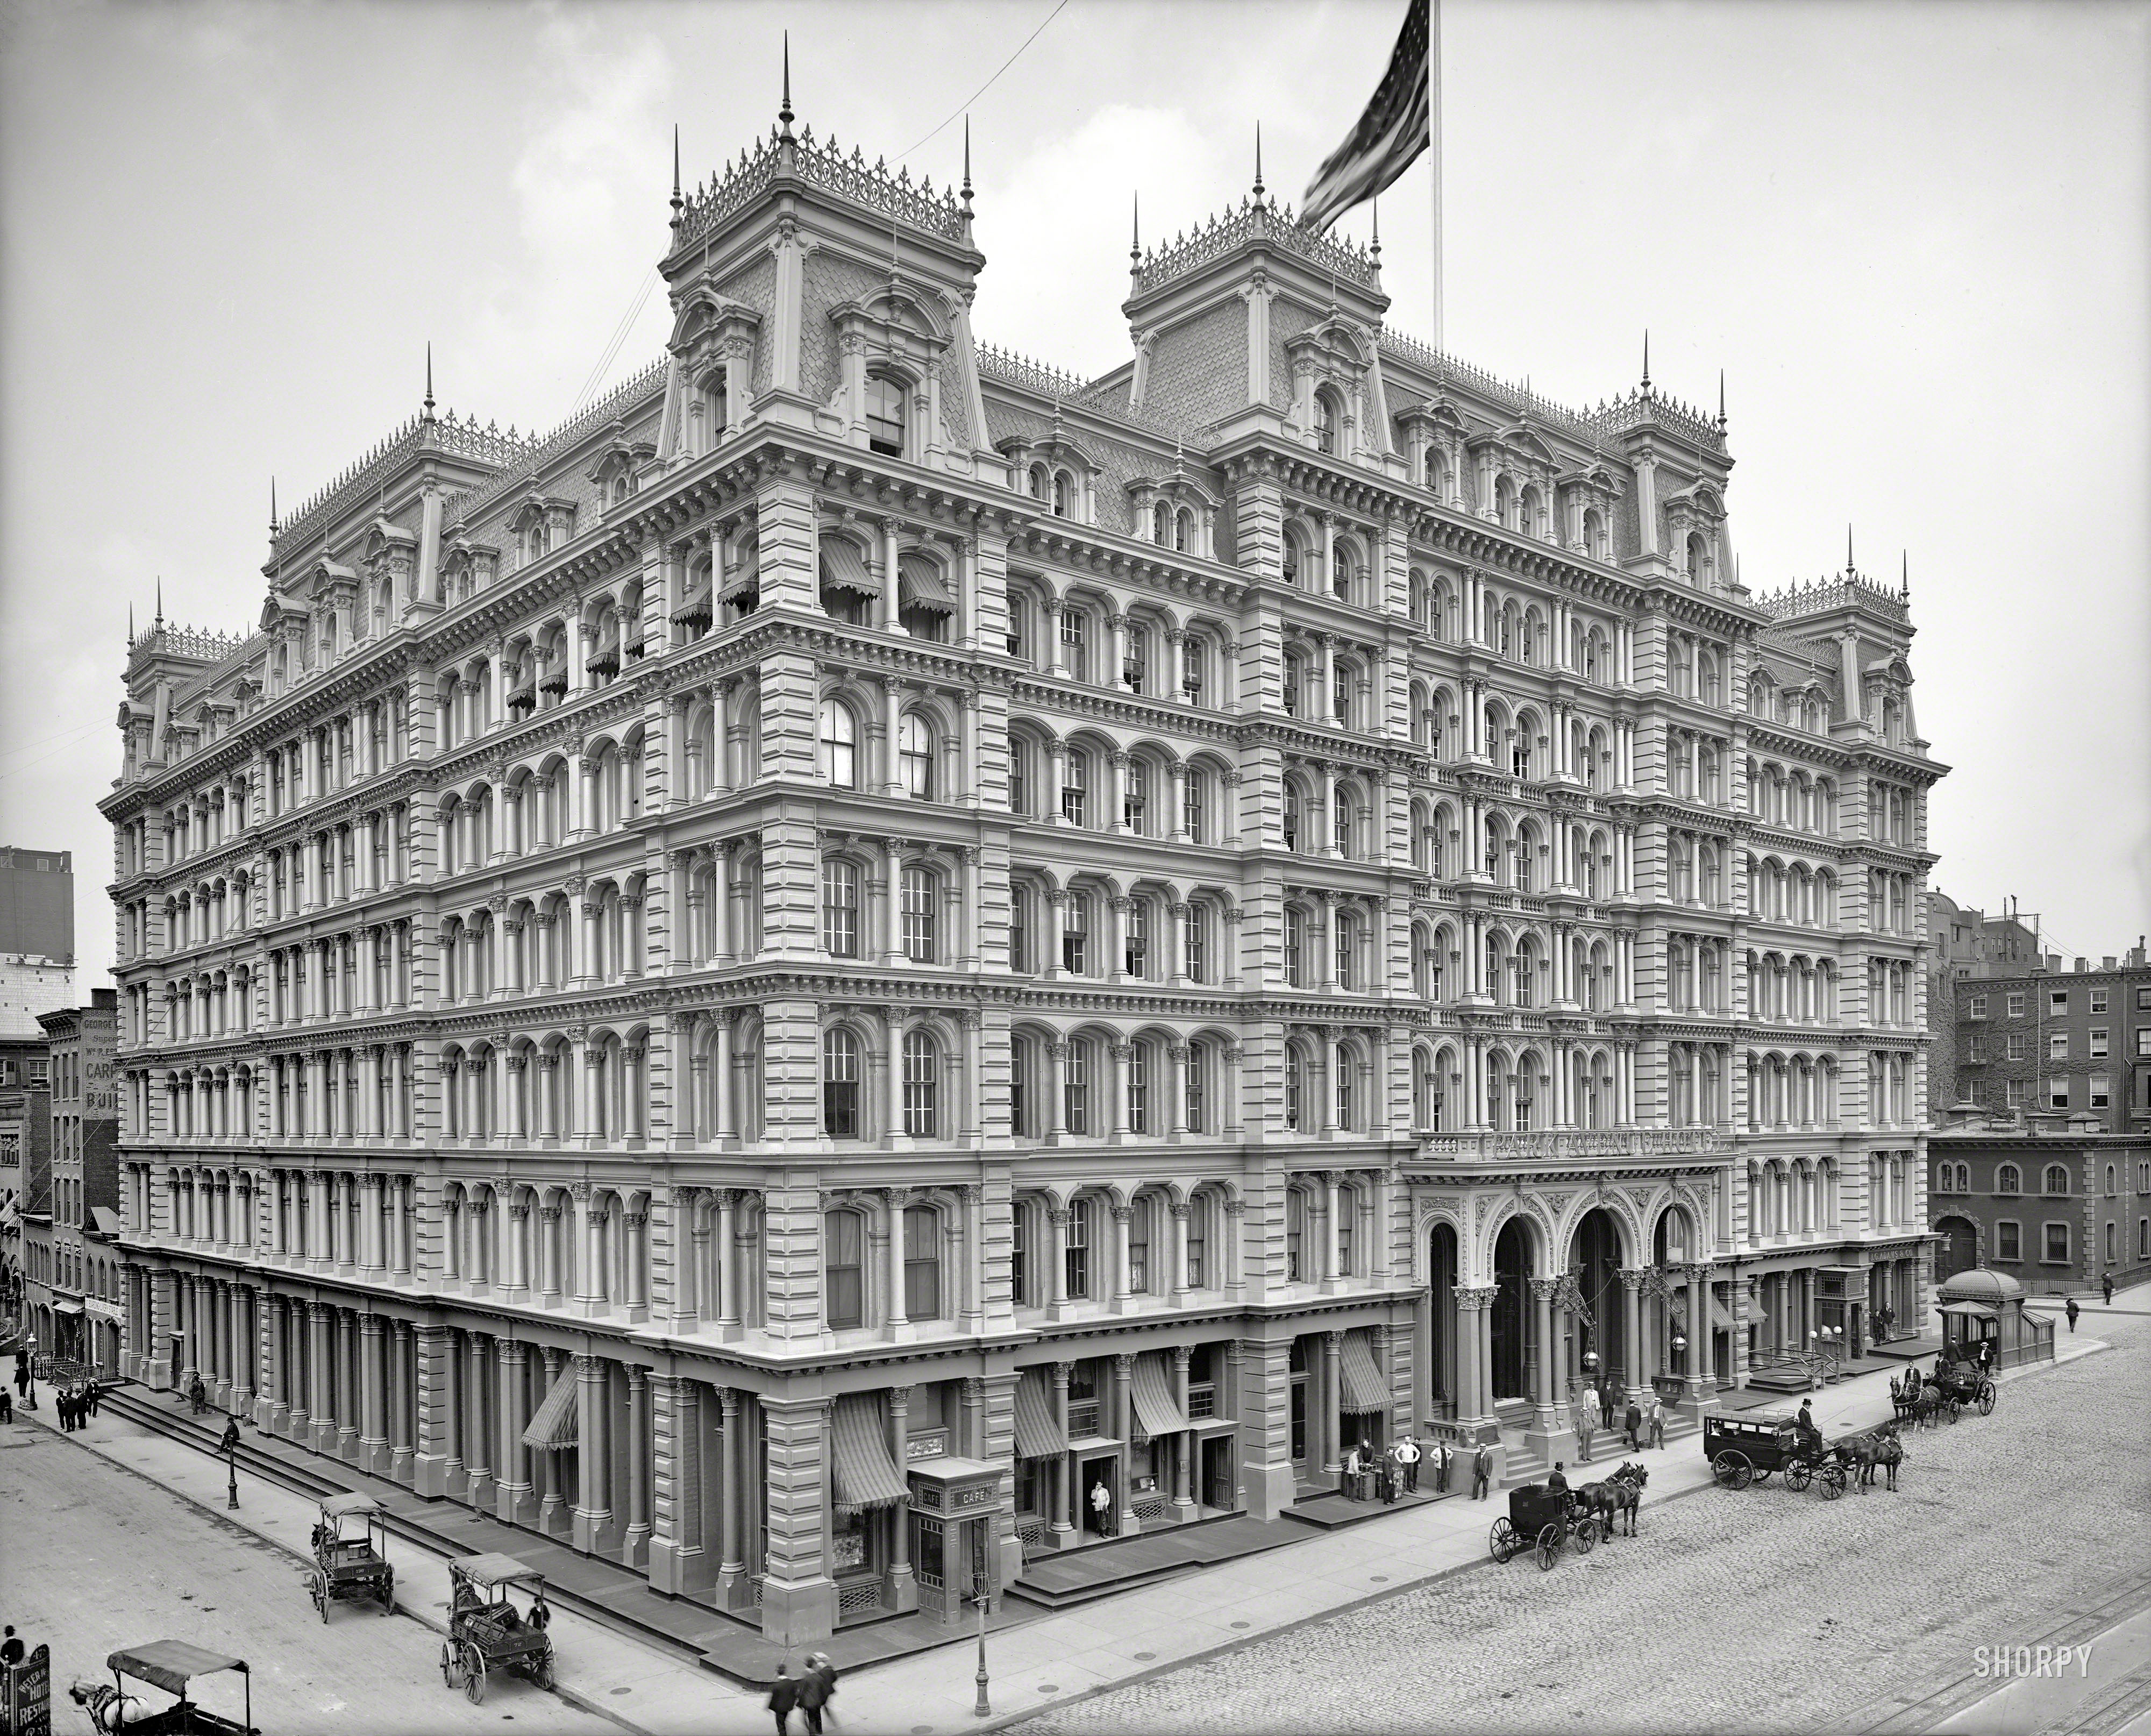 &nbsp; &nbsp; &nbsp; &nbsp; This Second Empire edifice opened in April 1878 as the Working-Women's Hotel, only to close eight weeks later due to an acute case of insolvency. Reopened as the Park Avenue Hotel, the cast-iron marvel at 34th Street lasted until 1924, when it was replaced by an office tower.
New York Circa 1905. "Park Avenue Hotel, Fourth Avenue entrance." 8x10 inch dry plate glass negative, Detroit Publishing Company. View full size.